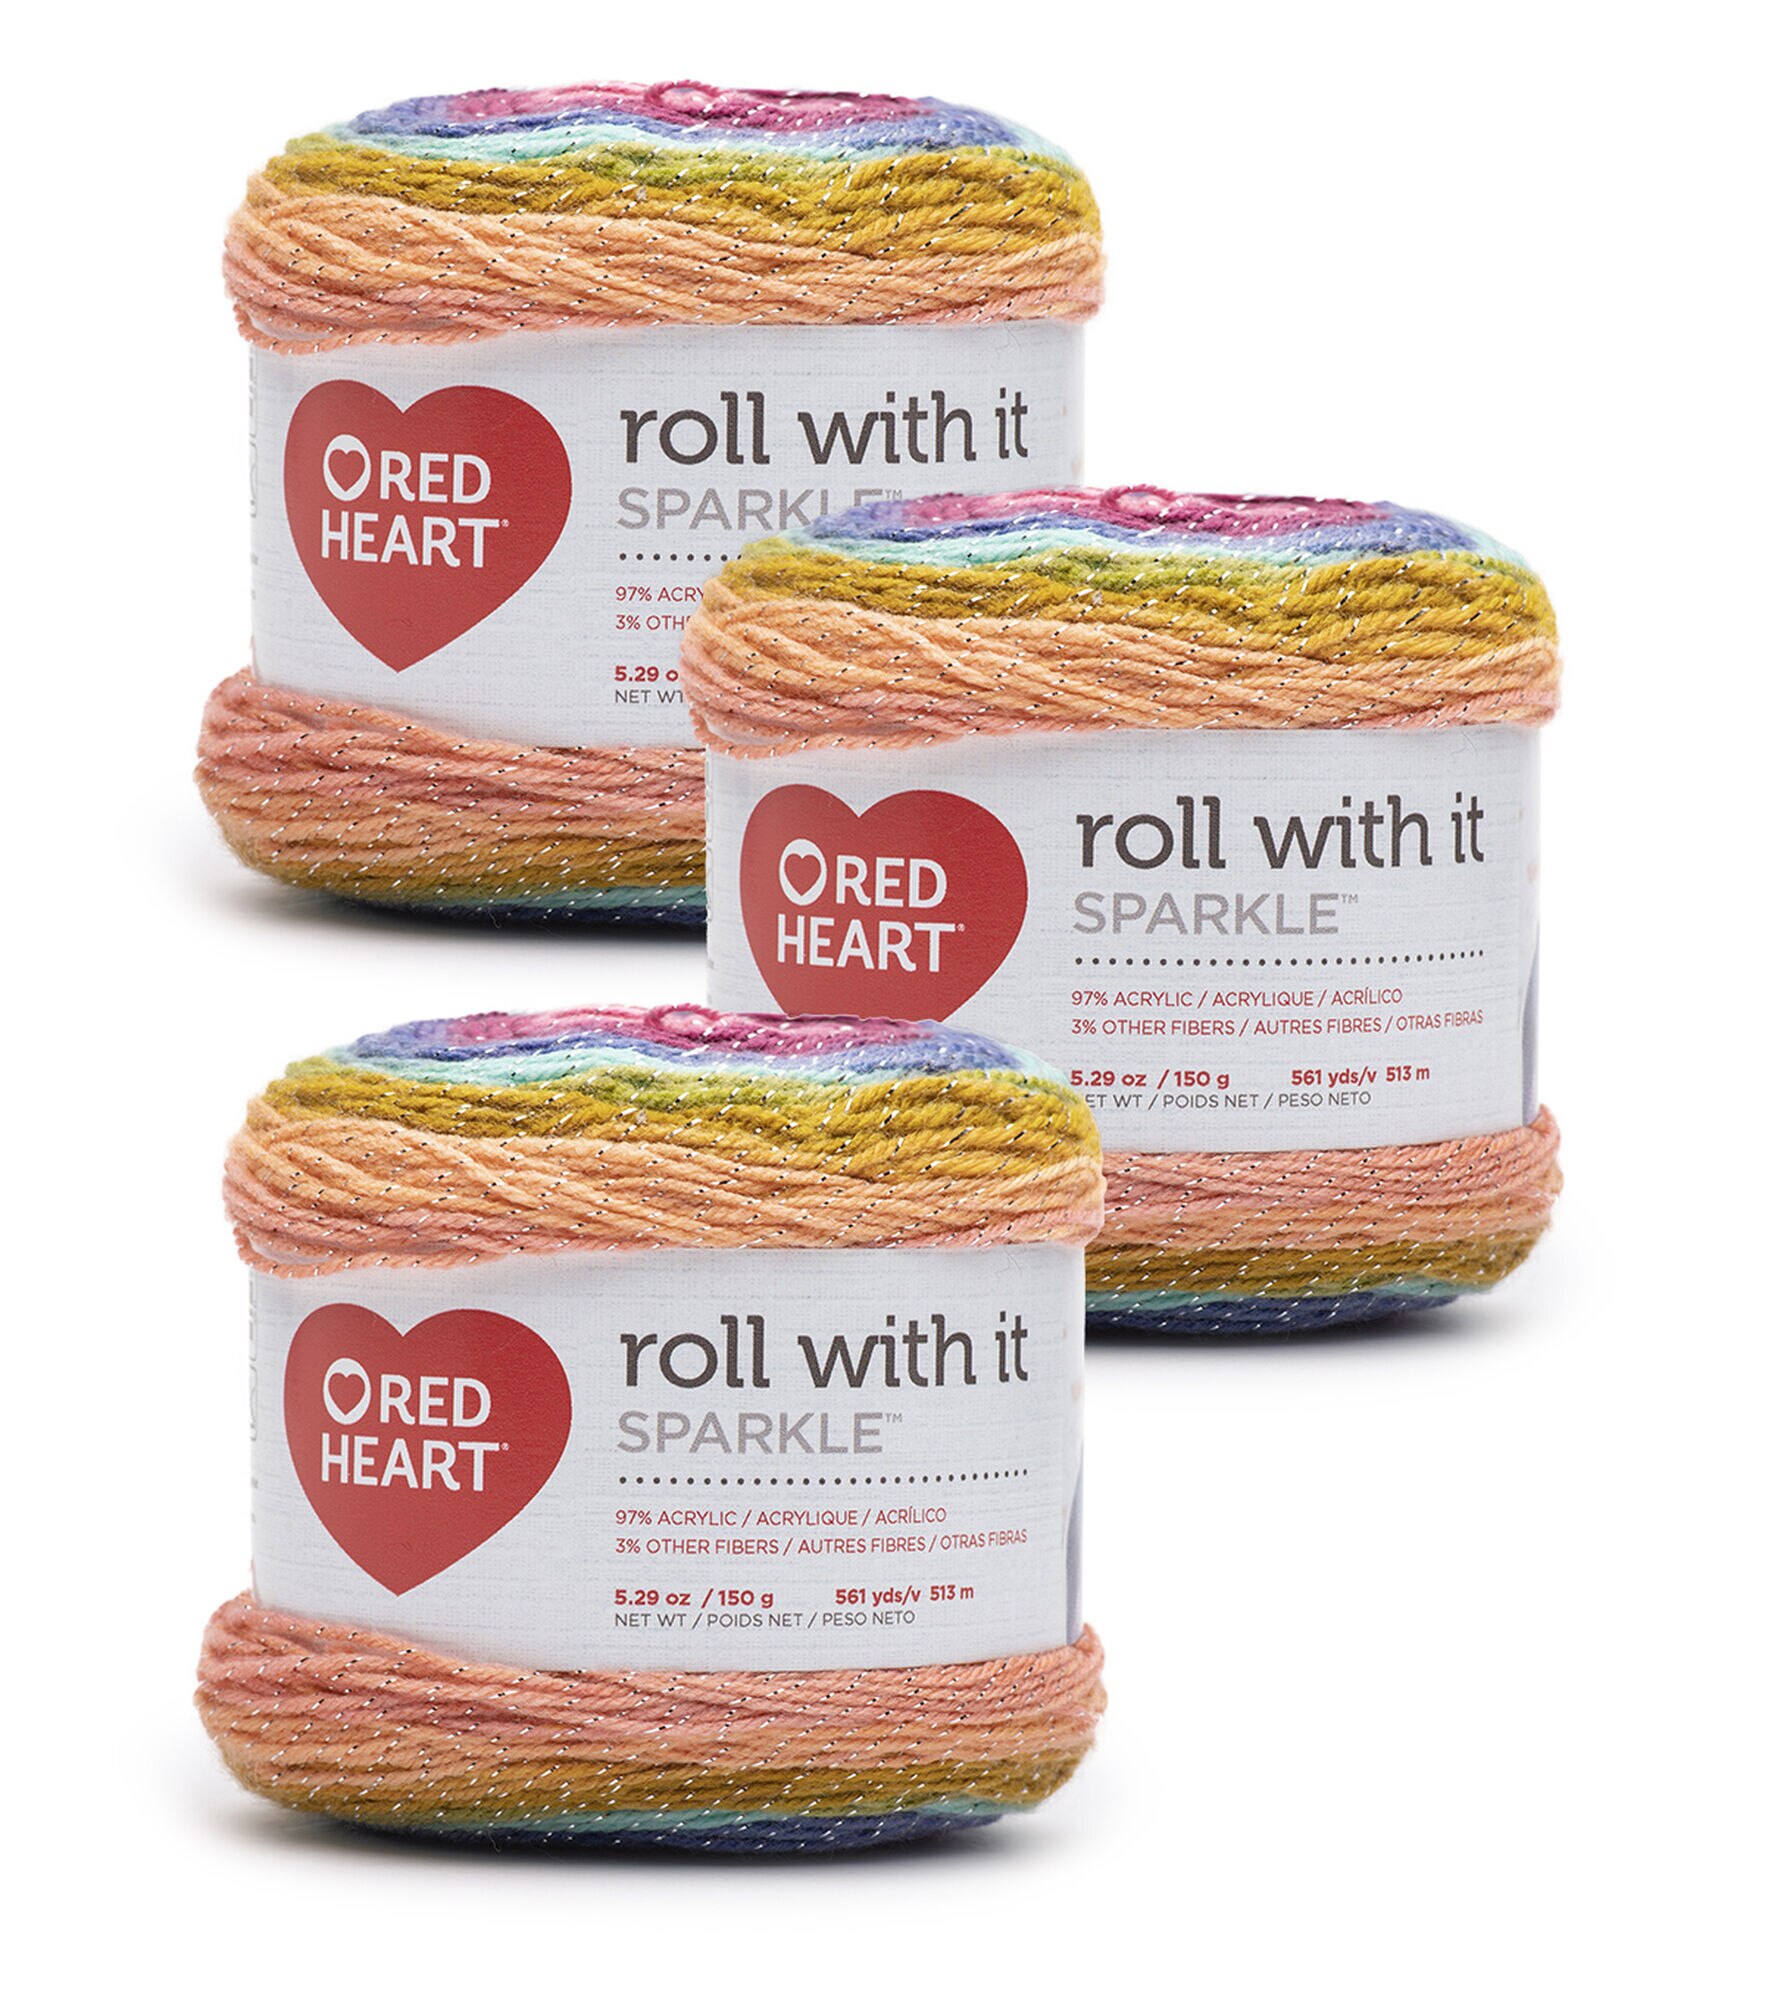 Red Heart Super Saver Worsted Weight Yarn 3 Bundle